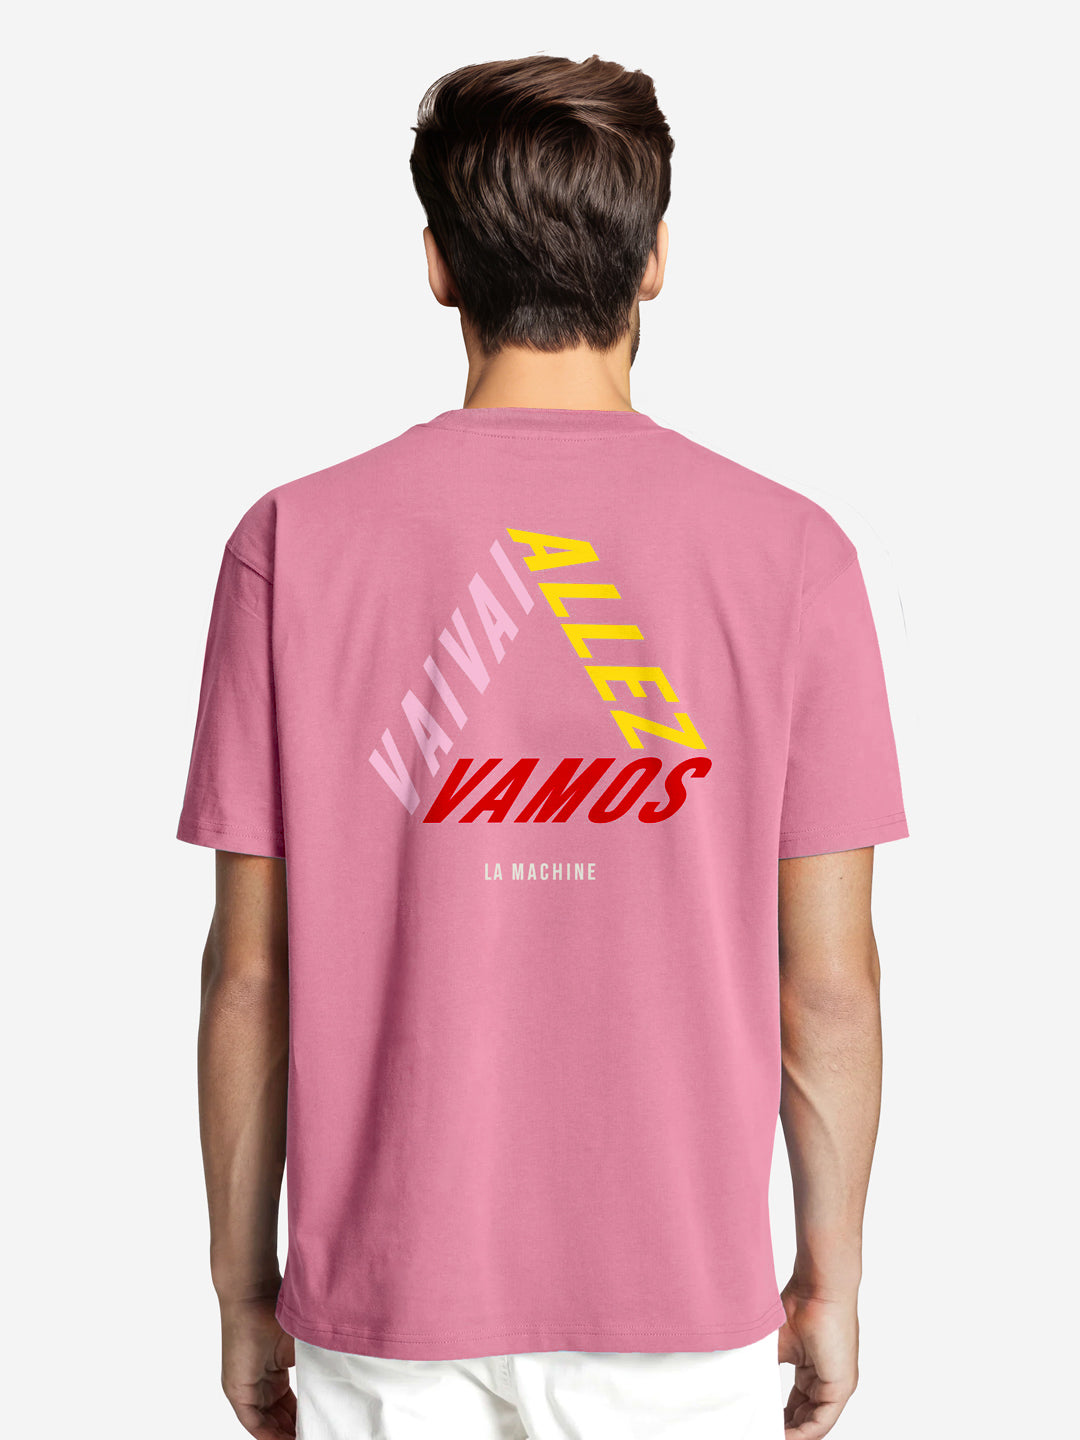 Vai Allez Vamos - Relaxed Fit - T-shirt